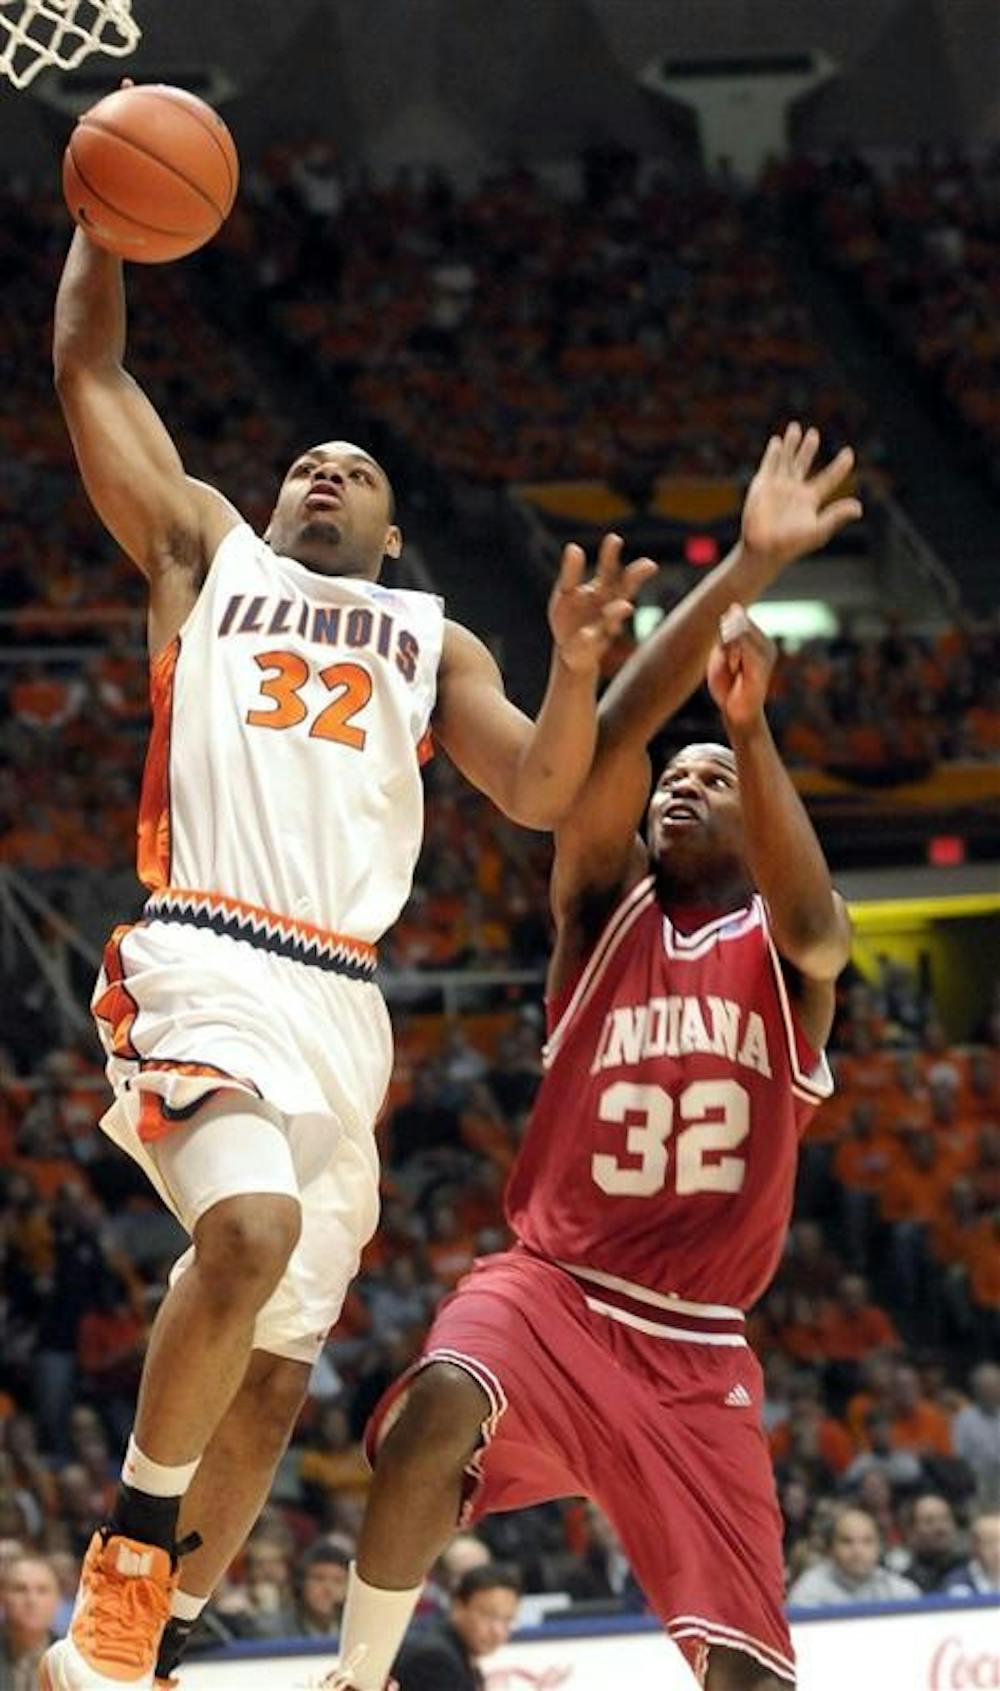 Illinois’ Demetri McCamey drives to the basket ahead of IU’s Broderick Lewis in the first half of Saturday’s game in Champaign, Ill. The Hoosiers fell to the Illini 76-45 for their sixth straight loss.